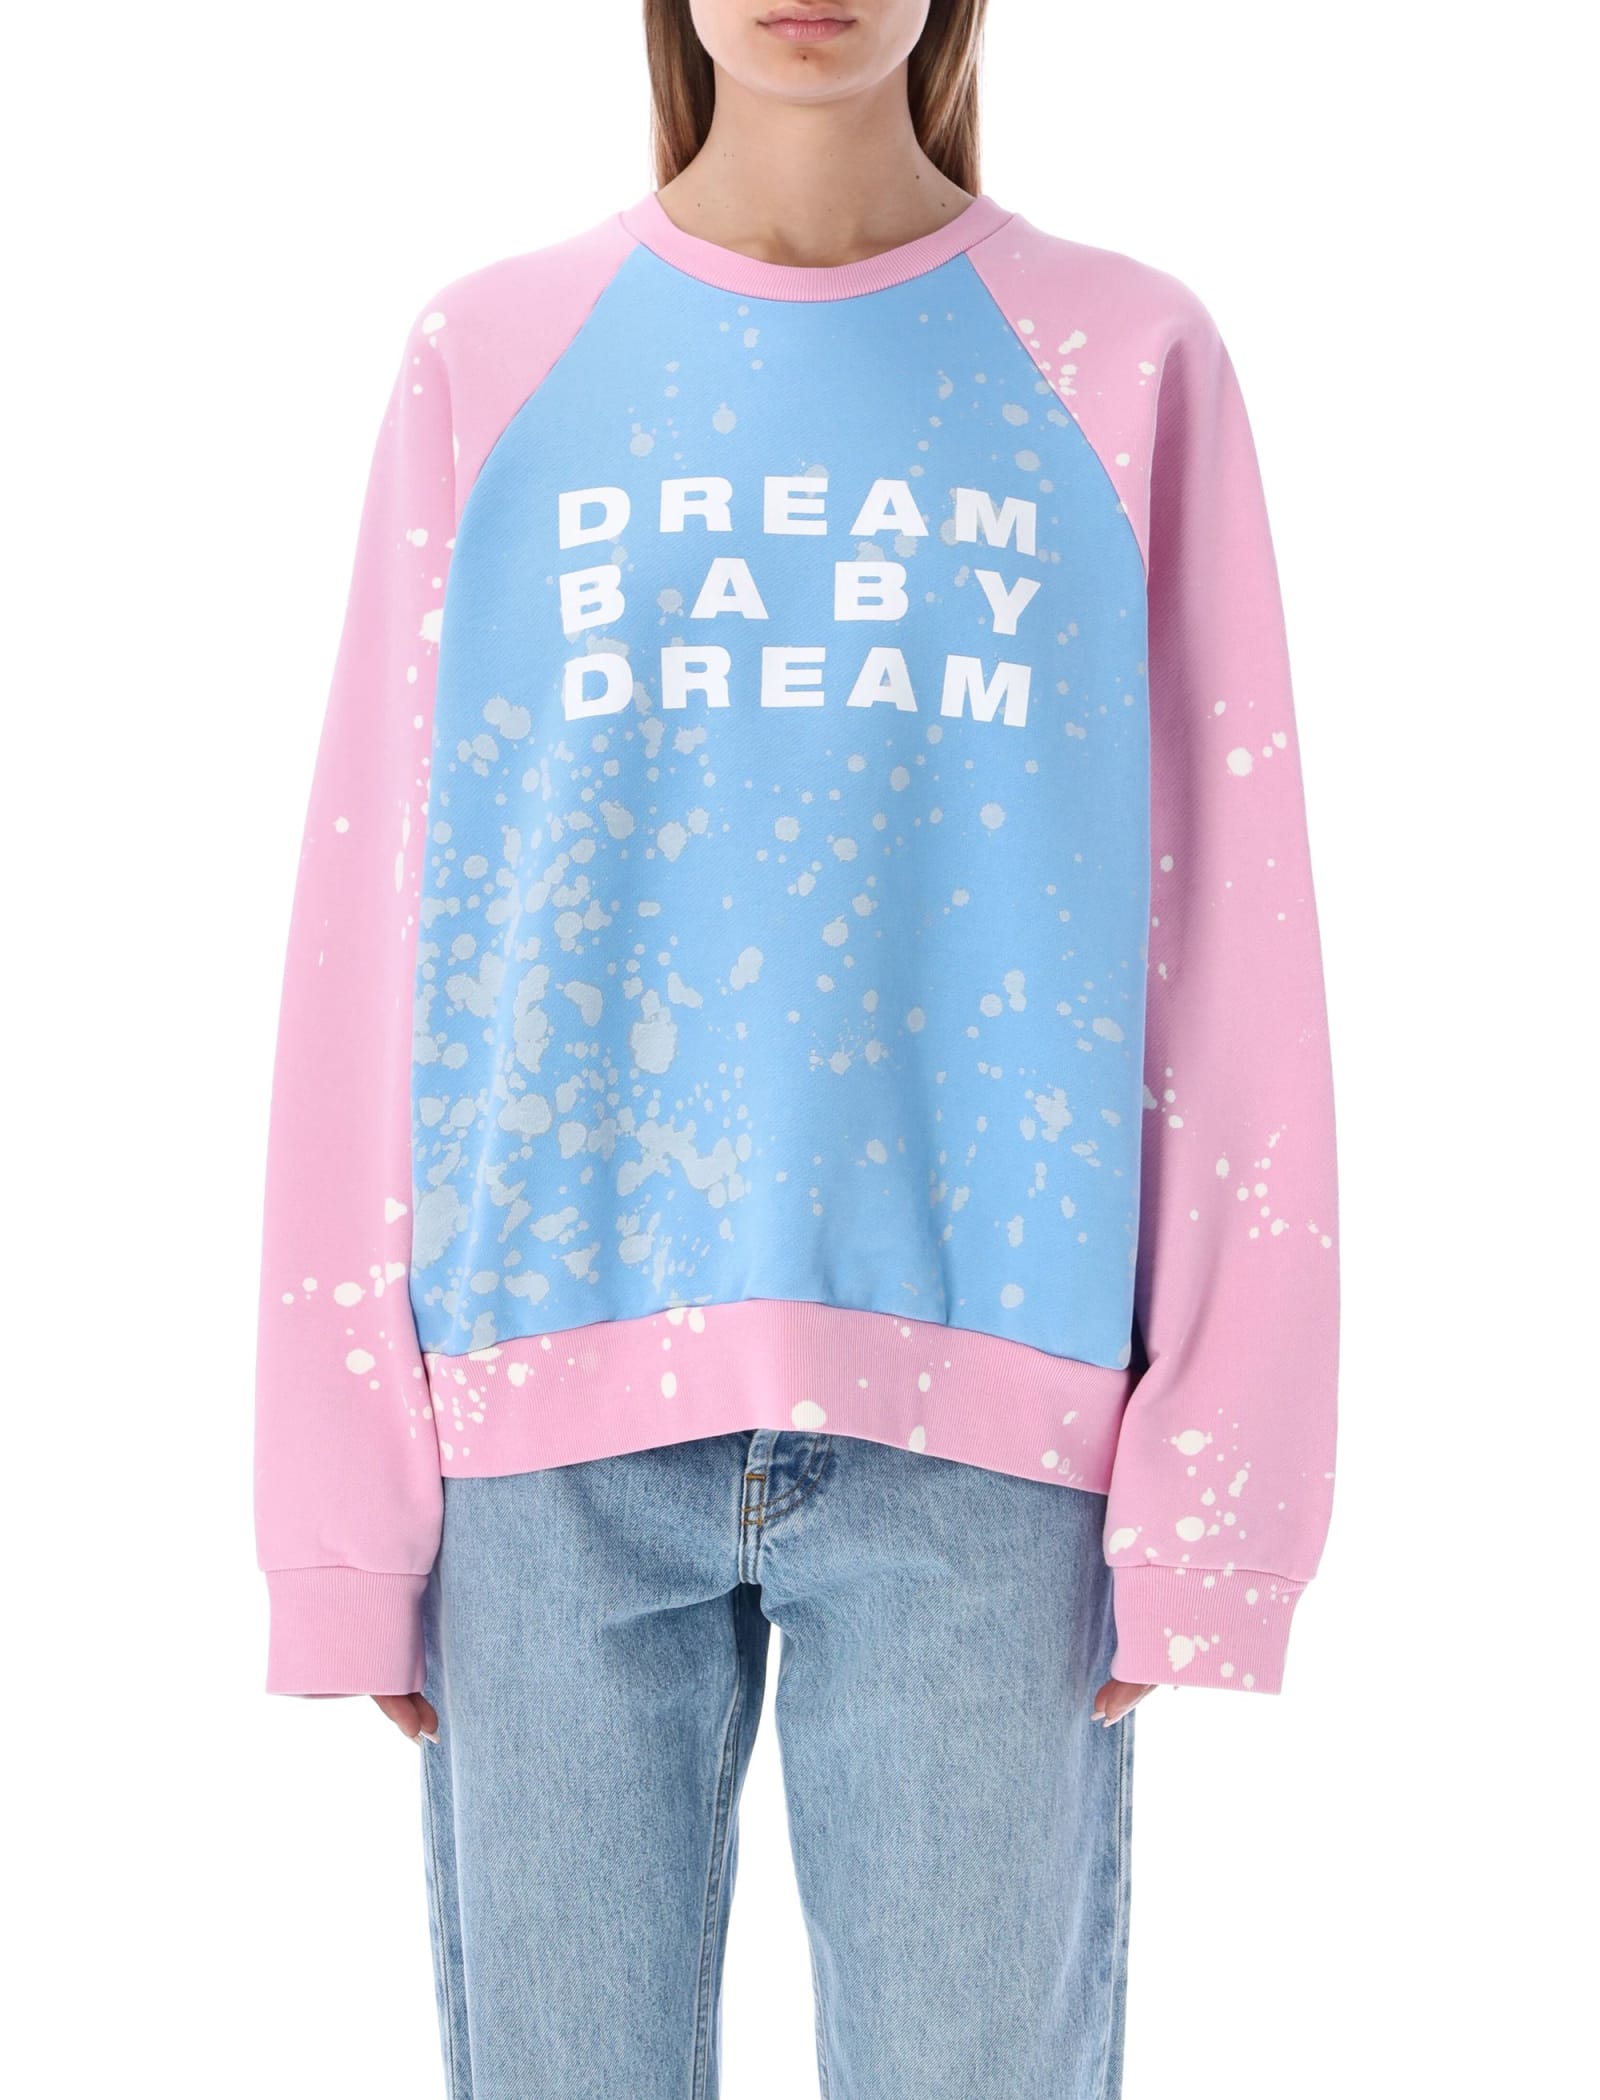 LIBERAL YOUTH MINISTRY DREAM SWEATSHIRT